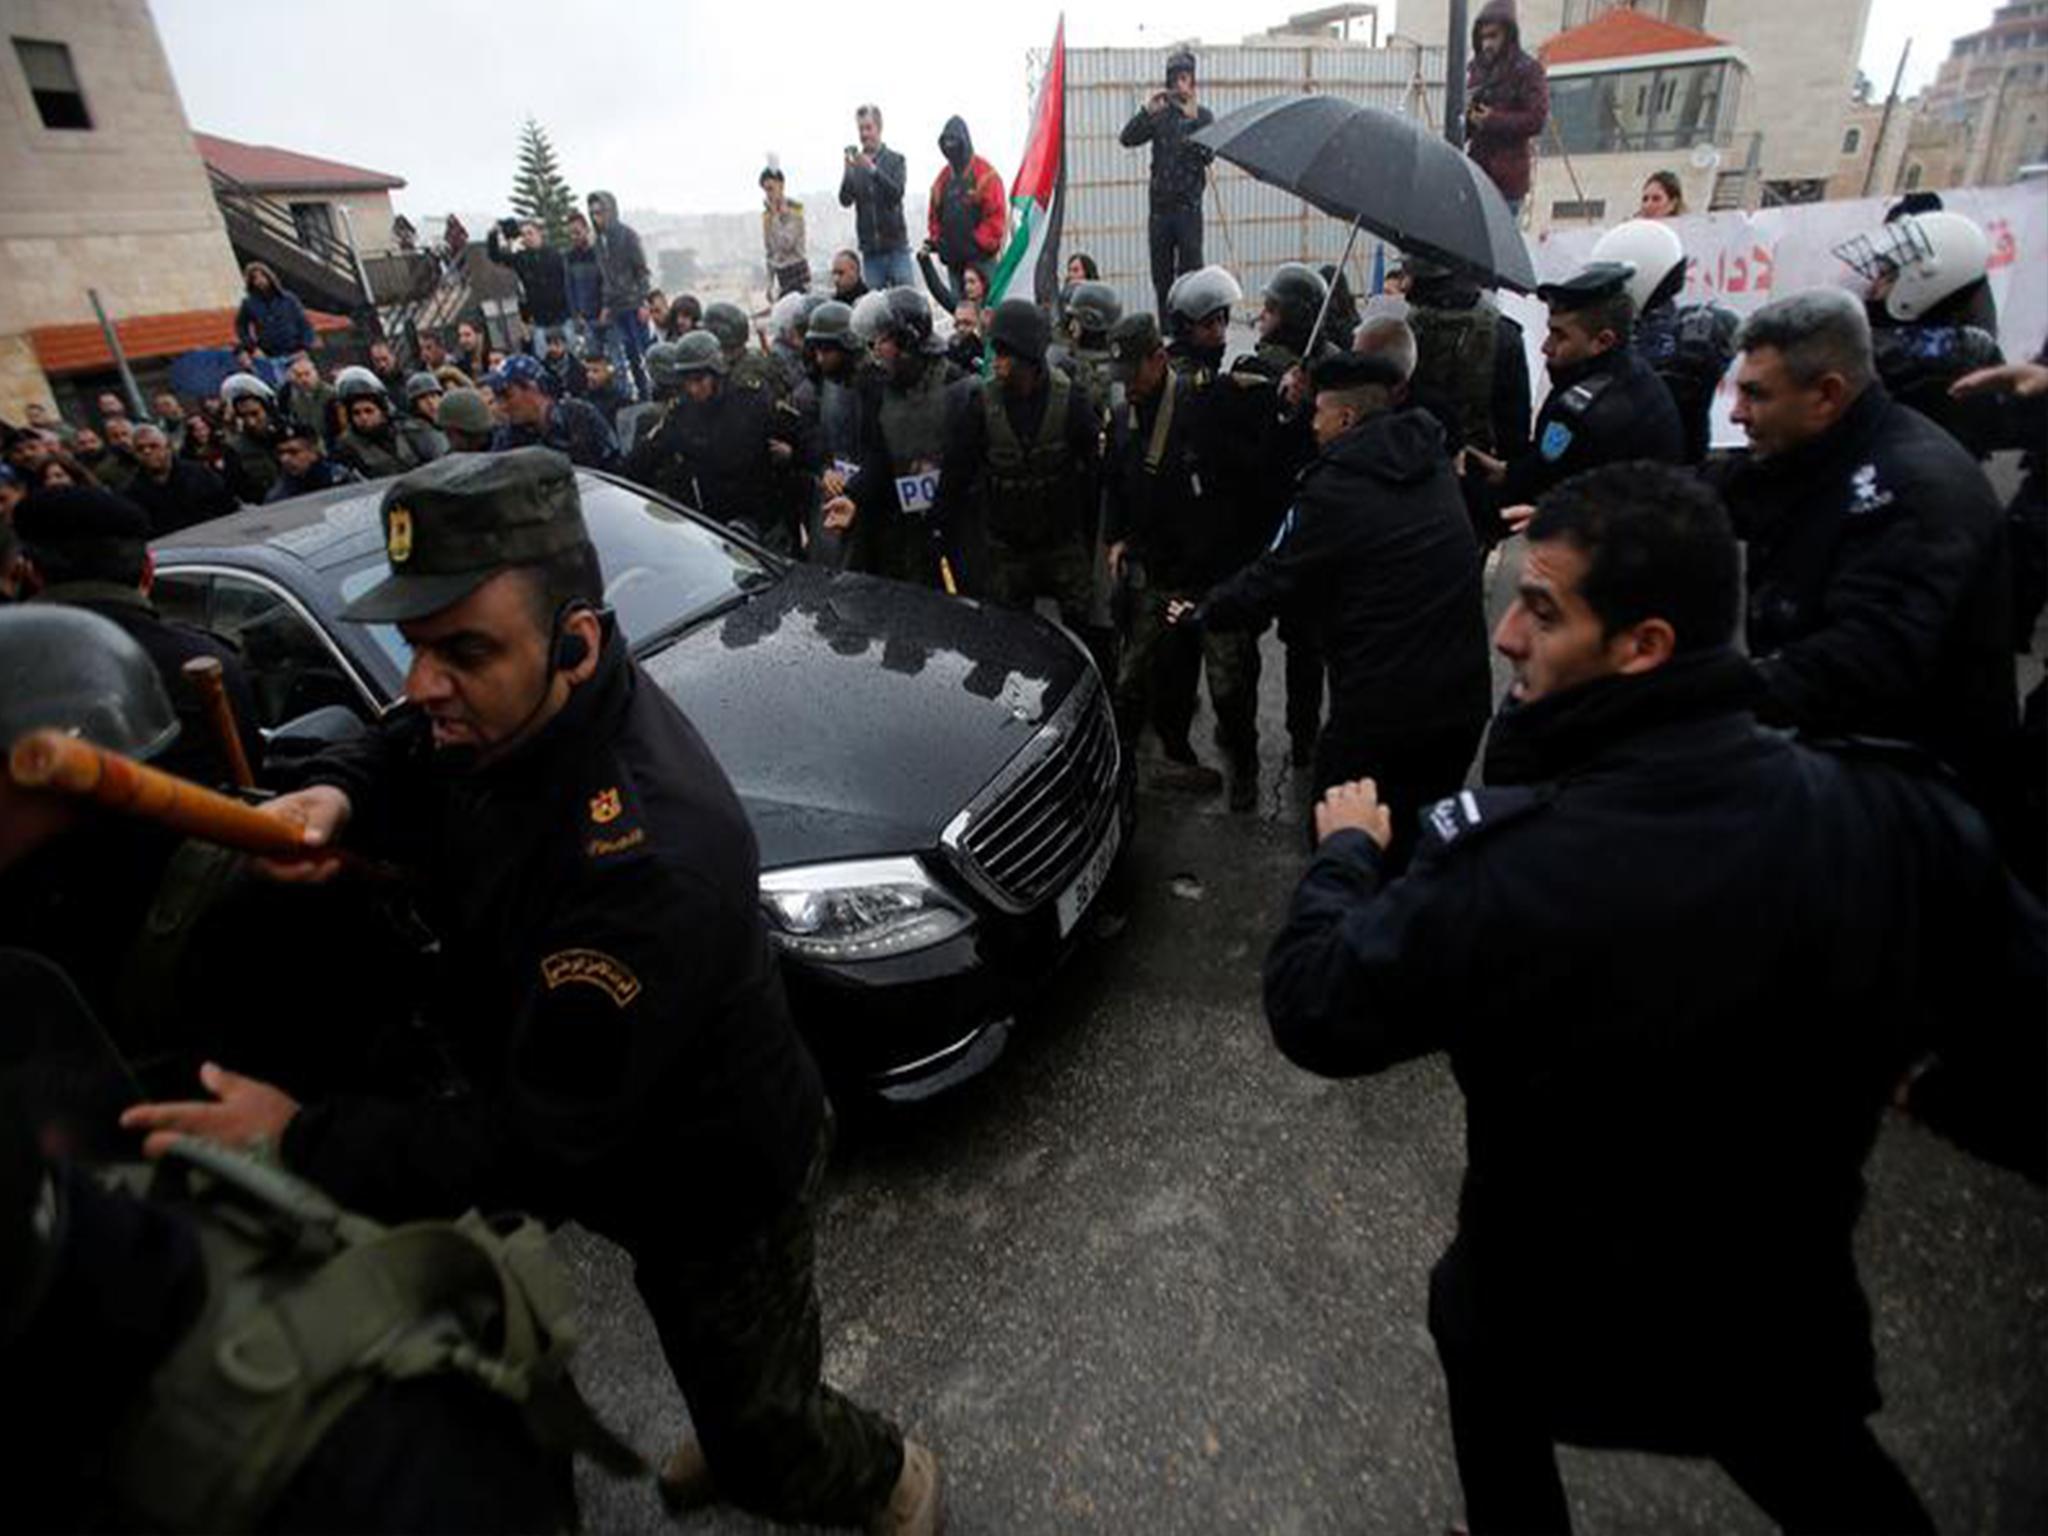 Security forces were present and were seen pushing demonstrators away